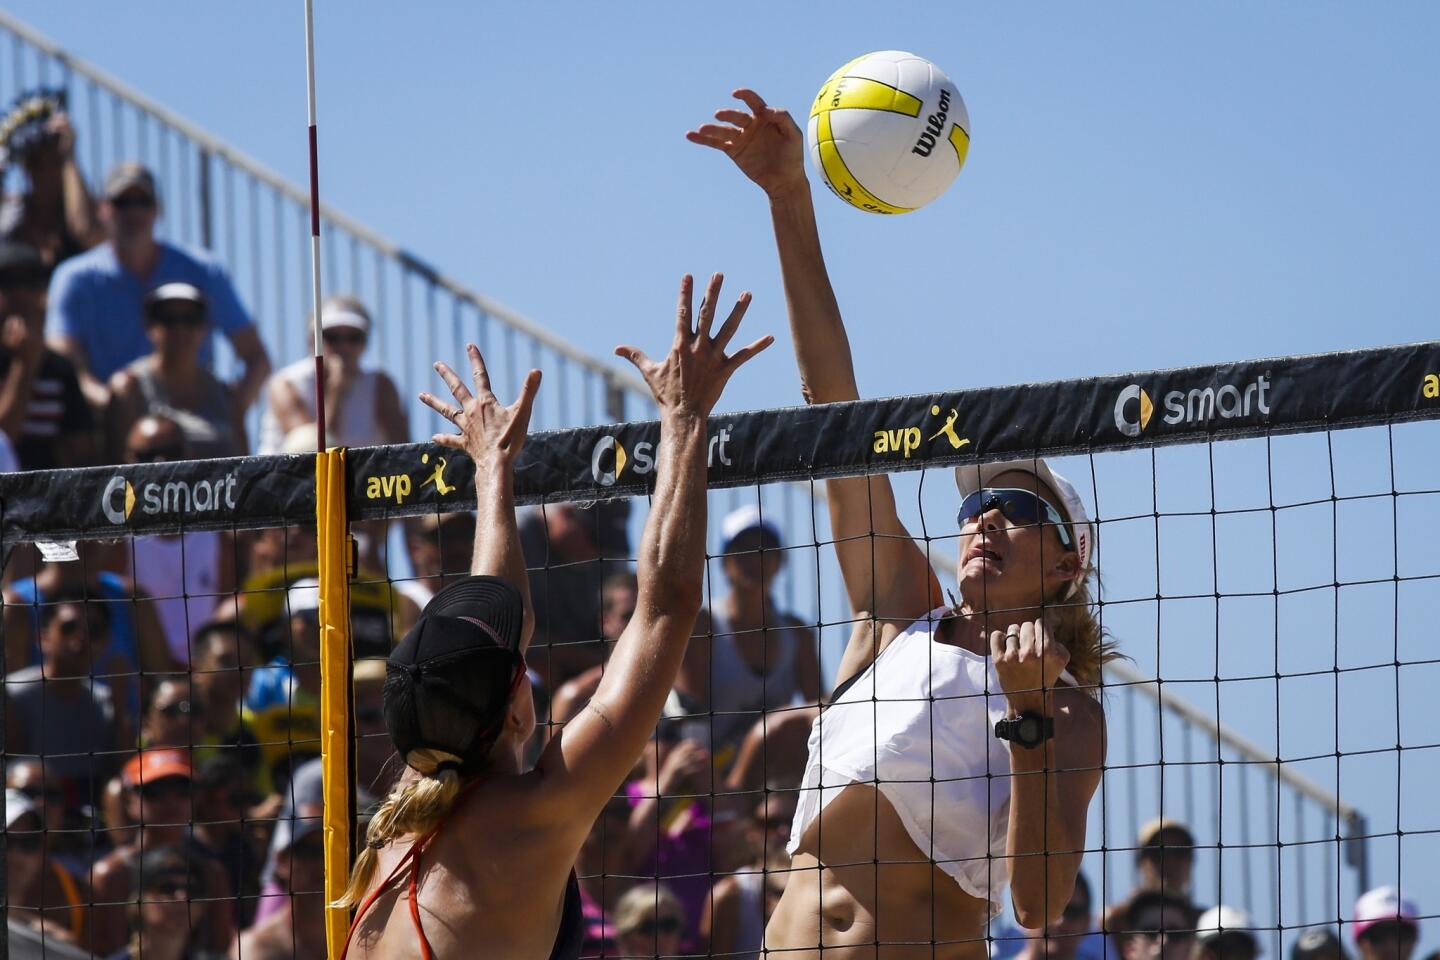 Kerri Walsh Jennings hits the ball against Heather Hughes during the Women's AVP Pro Beach Volleyball Championship final on Sunday in Huntington Beach.